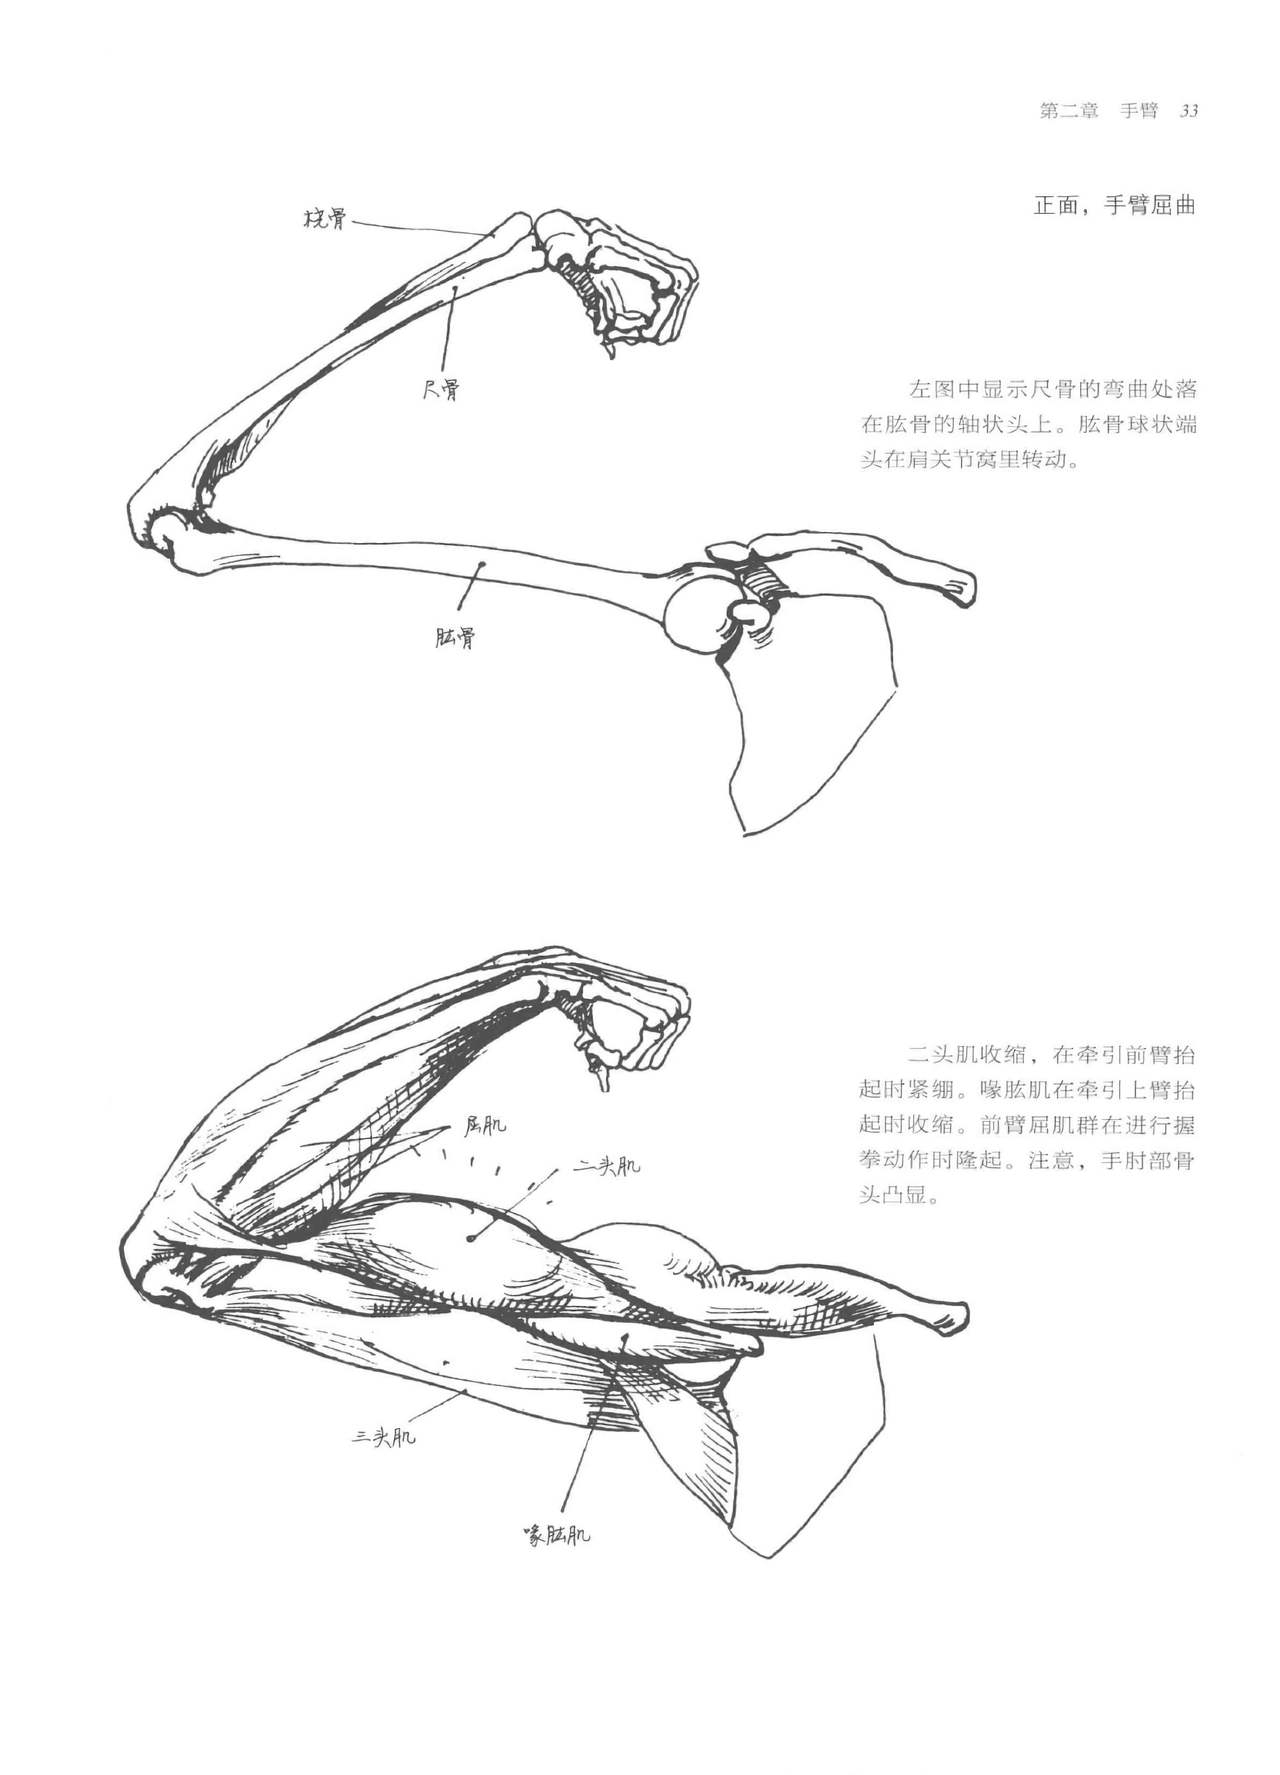 Anatomy-A Complete Guide for Artists - Joseph Sheppard [Chinese] 33